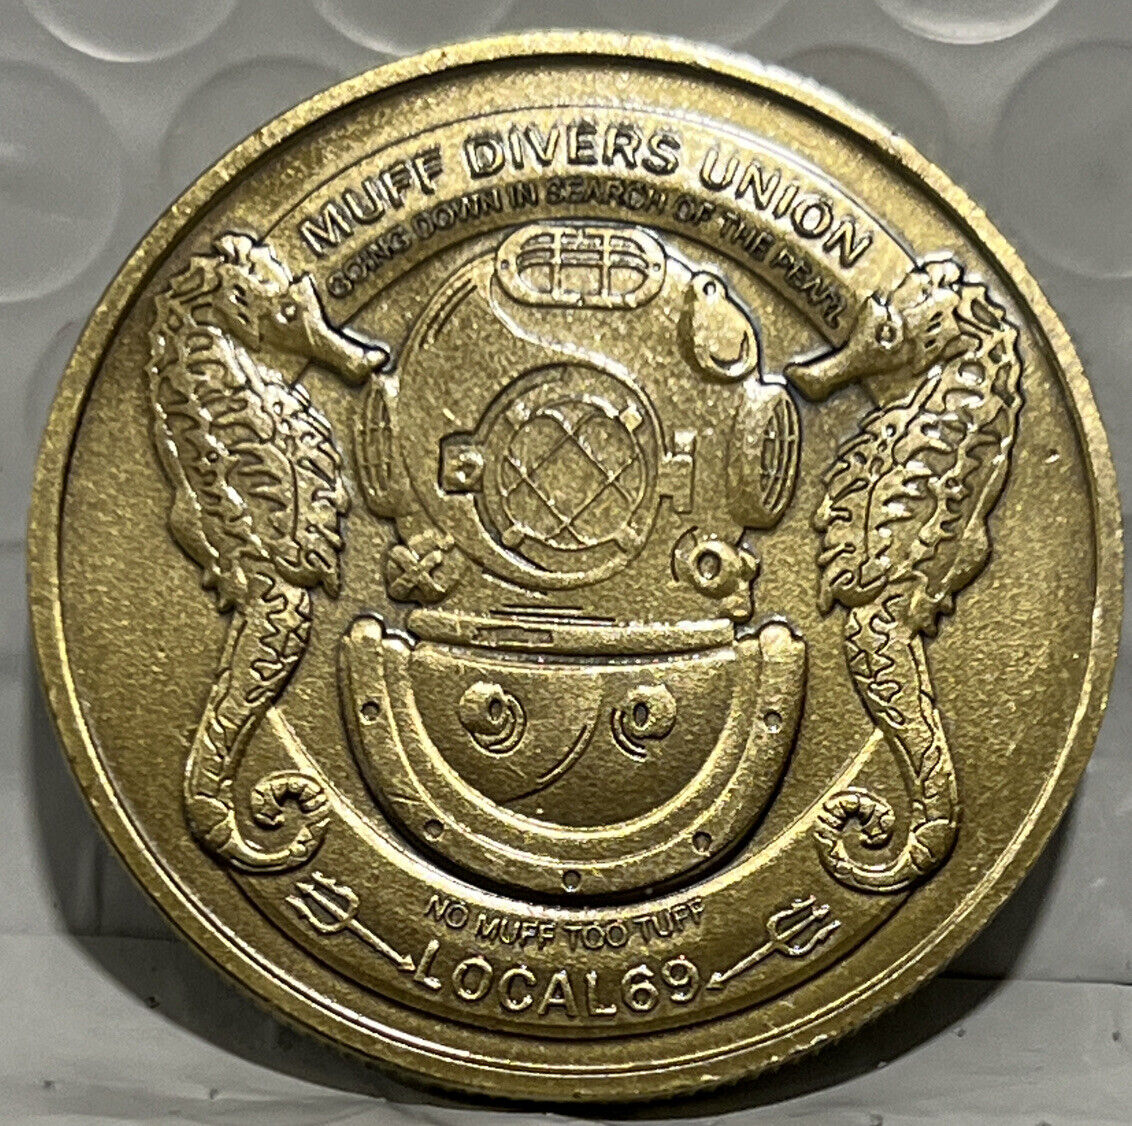 * Muff Divers Union Local 69 Heads /Tails Adult Novelty Coin Token Bronze Finish